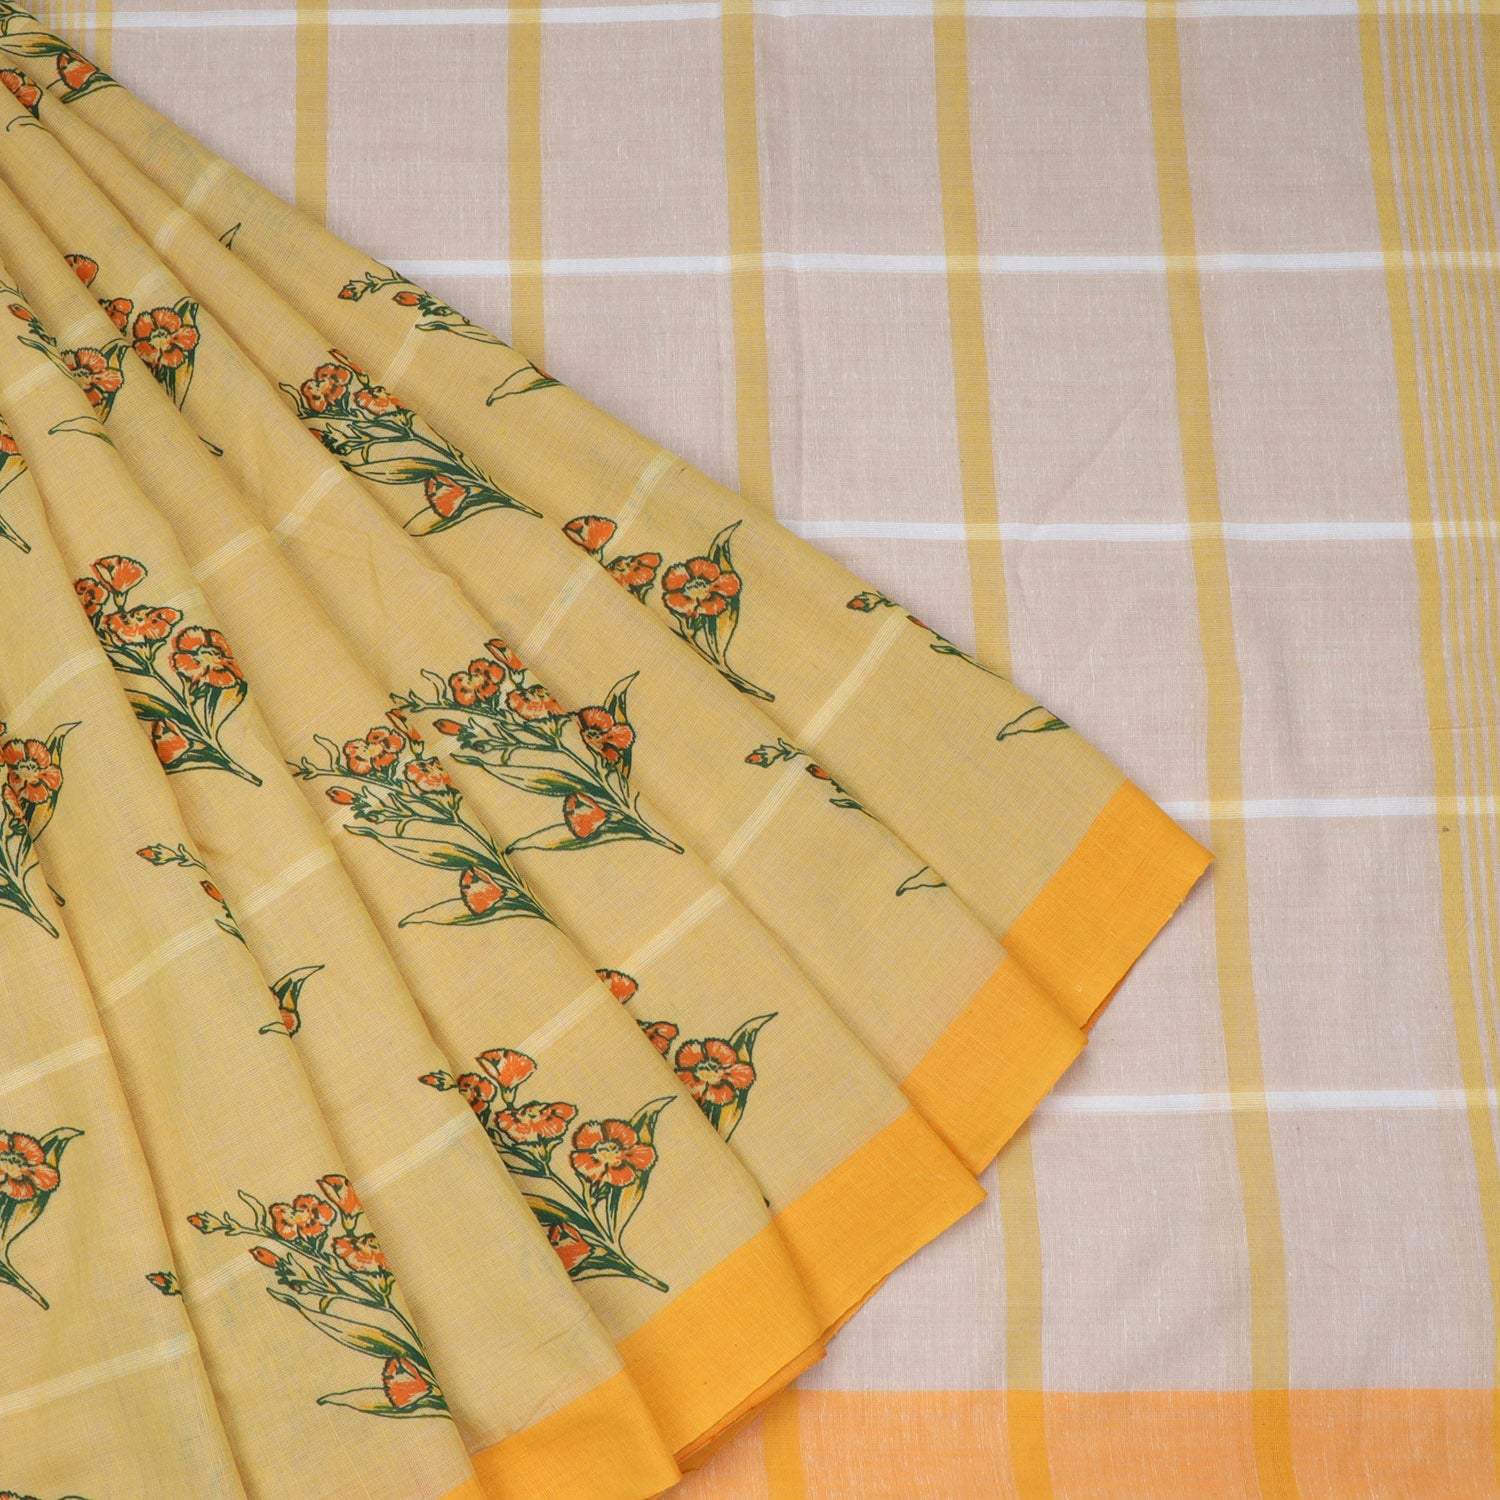 Pale Yellow Cotton Saree With Floral Print - Singhania's